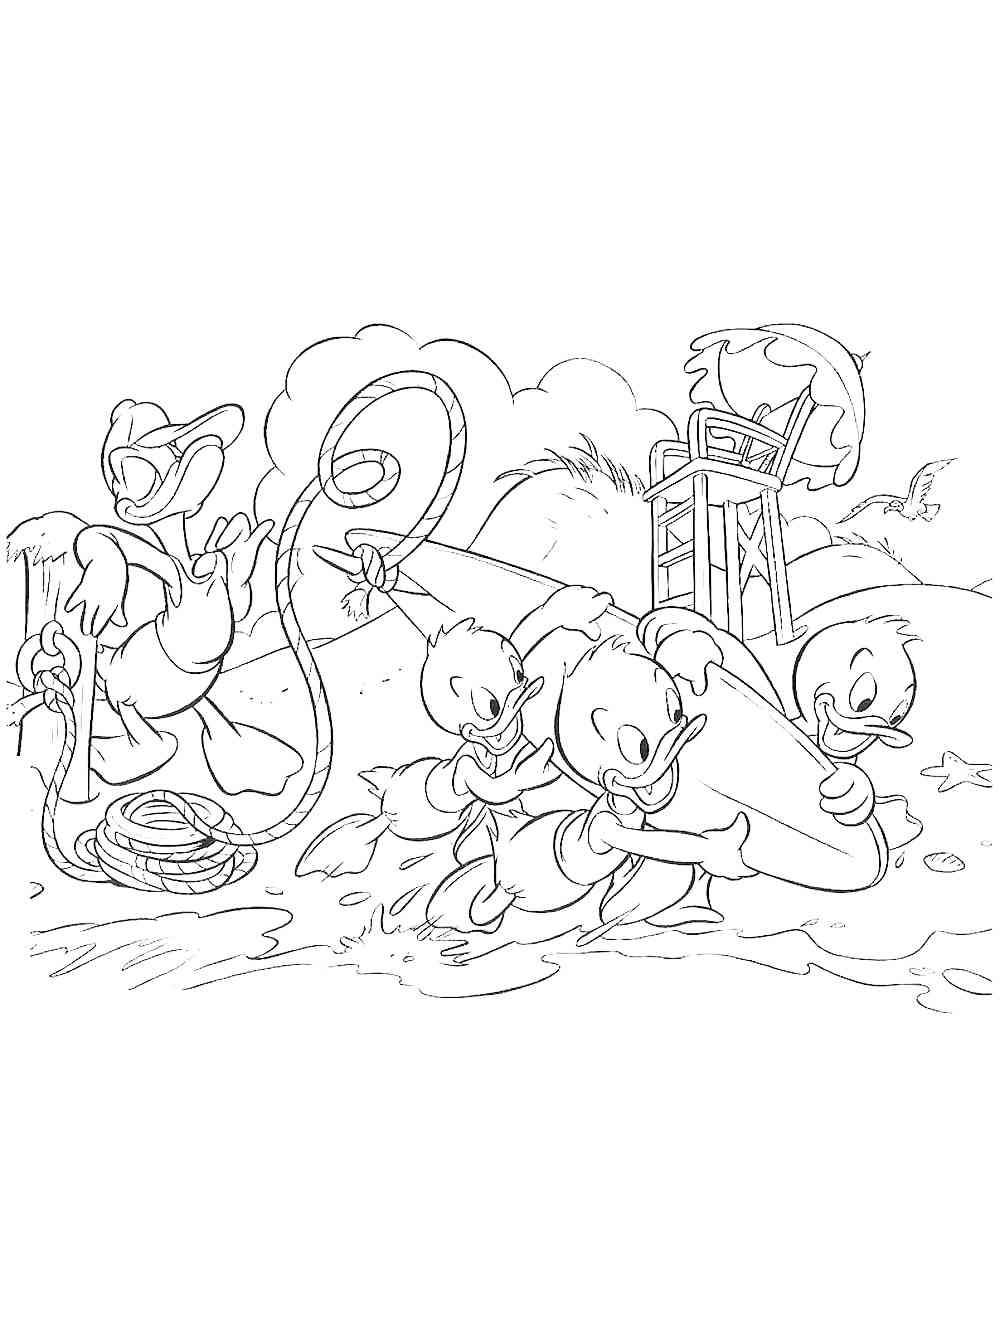 DuckTales 12 coloring page